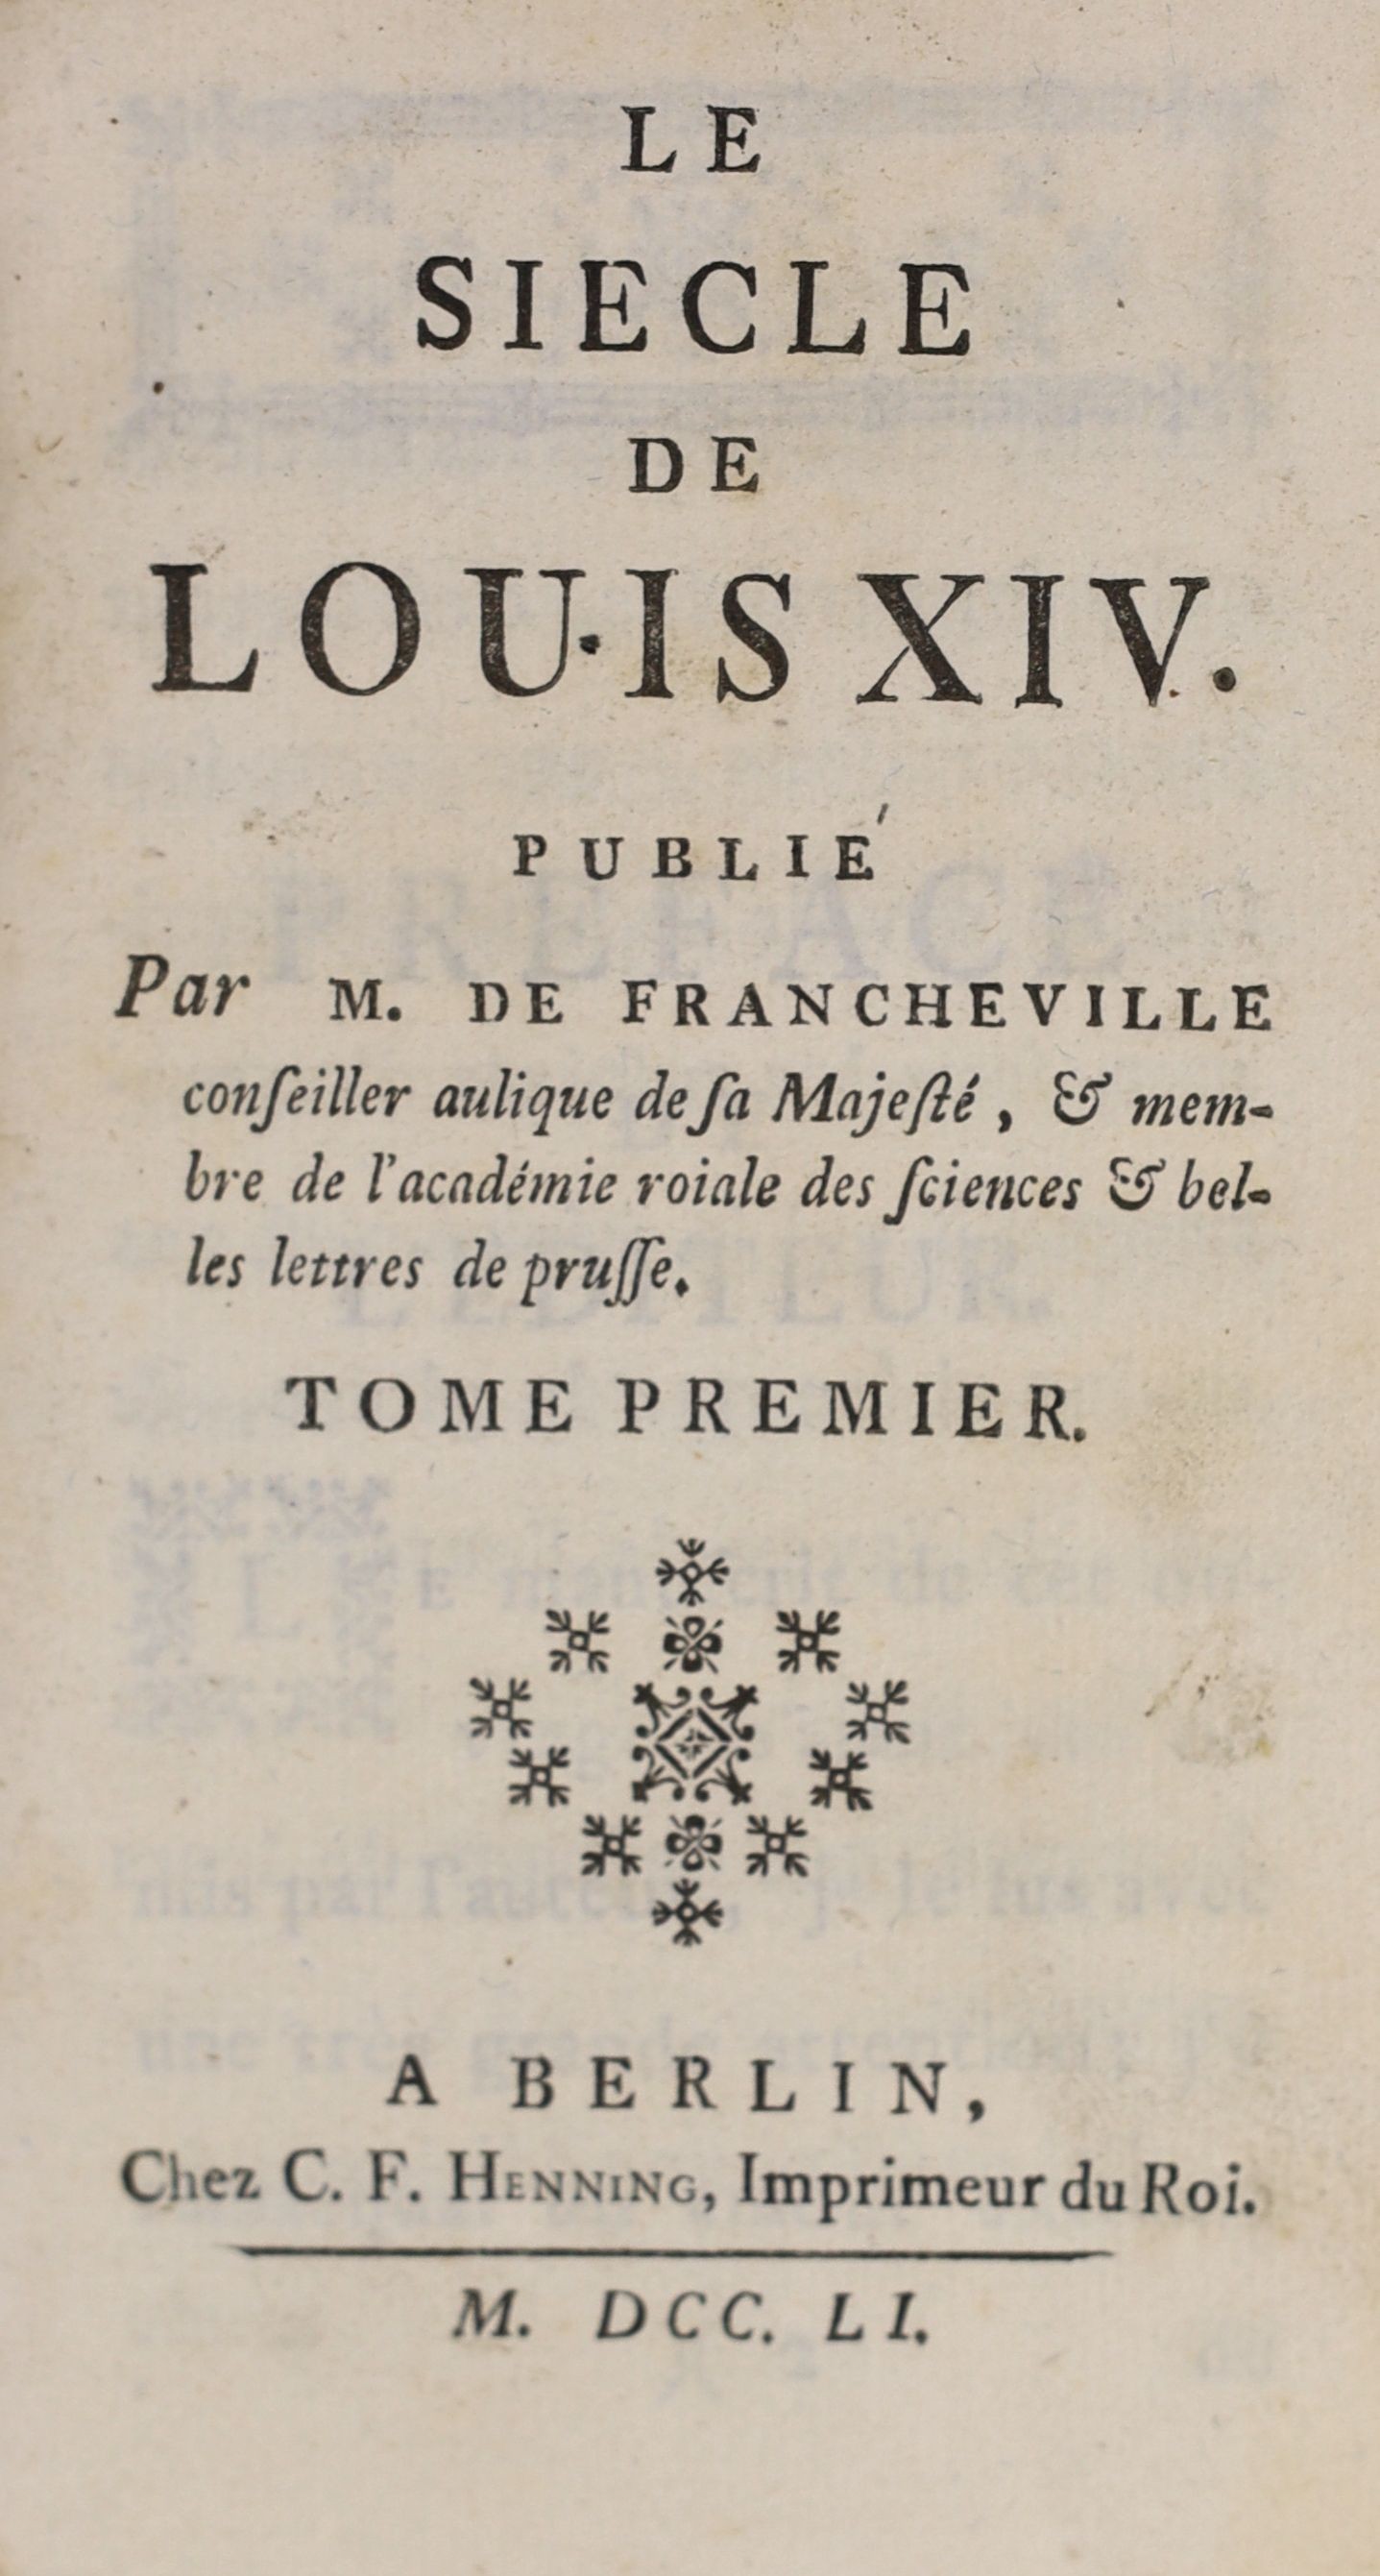 Voltaire, Francois Marie Arouet de, - Le Siecle de Louis XIV, 1st edition, 2vols, 12mo, calf, C.F. Henning, Berlin, 1751, Note: Under the pseudonym of M. de Francheville, whilst at the court of King Frederick II of Pruss